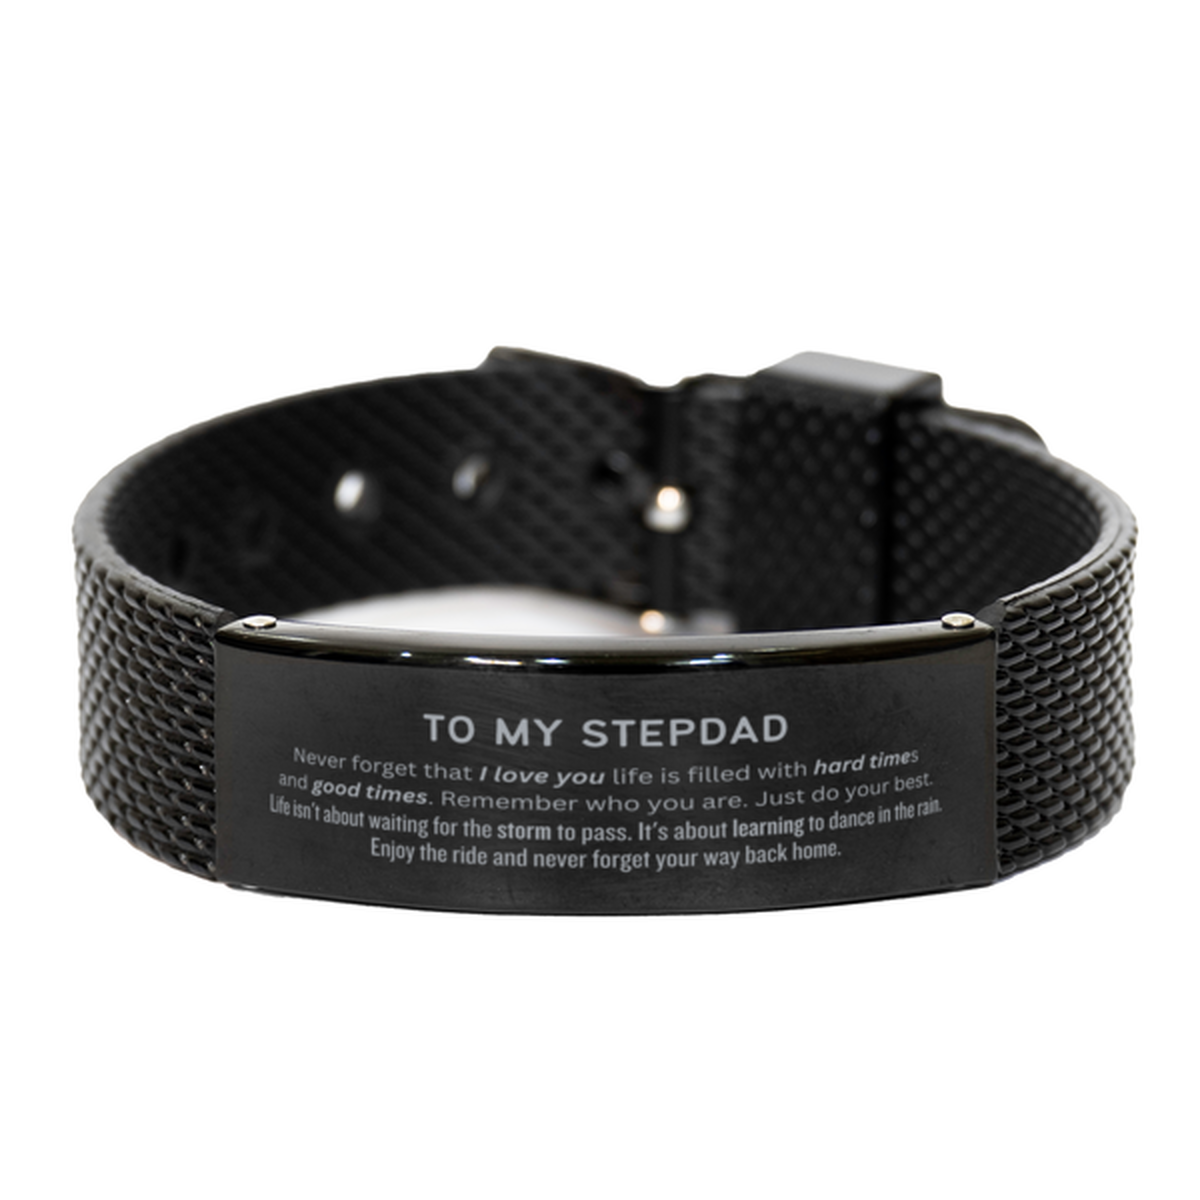 Christmas Stepdad Black Shark Mesh Bracelet Gifts, To My Stepdad Birthday Thank You Gifts For Stepdad, Graduation Unique Gifts For Stepdad To My Stepdad Never forget that I love you life is filled with hard times and good times. Remember who you are. Just